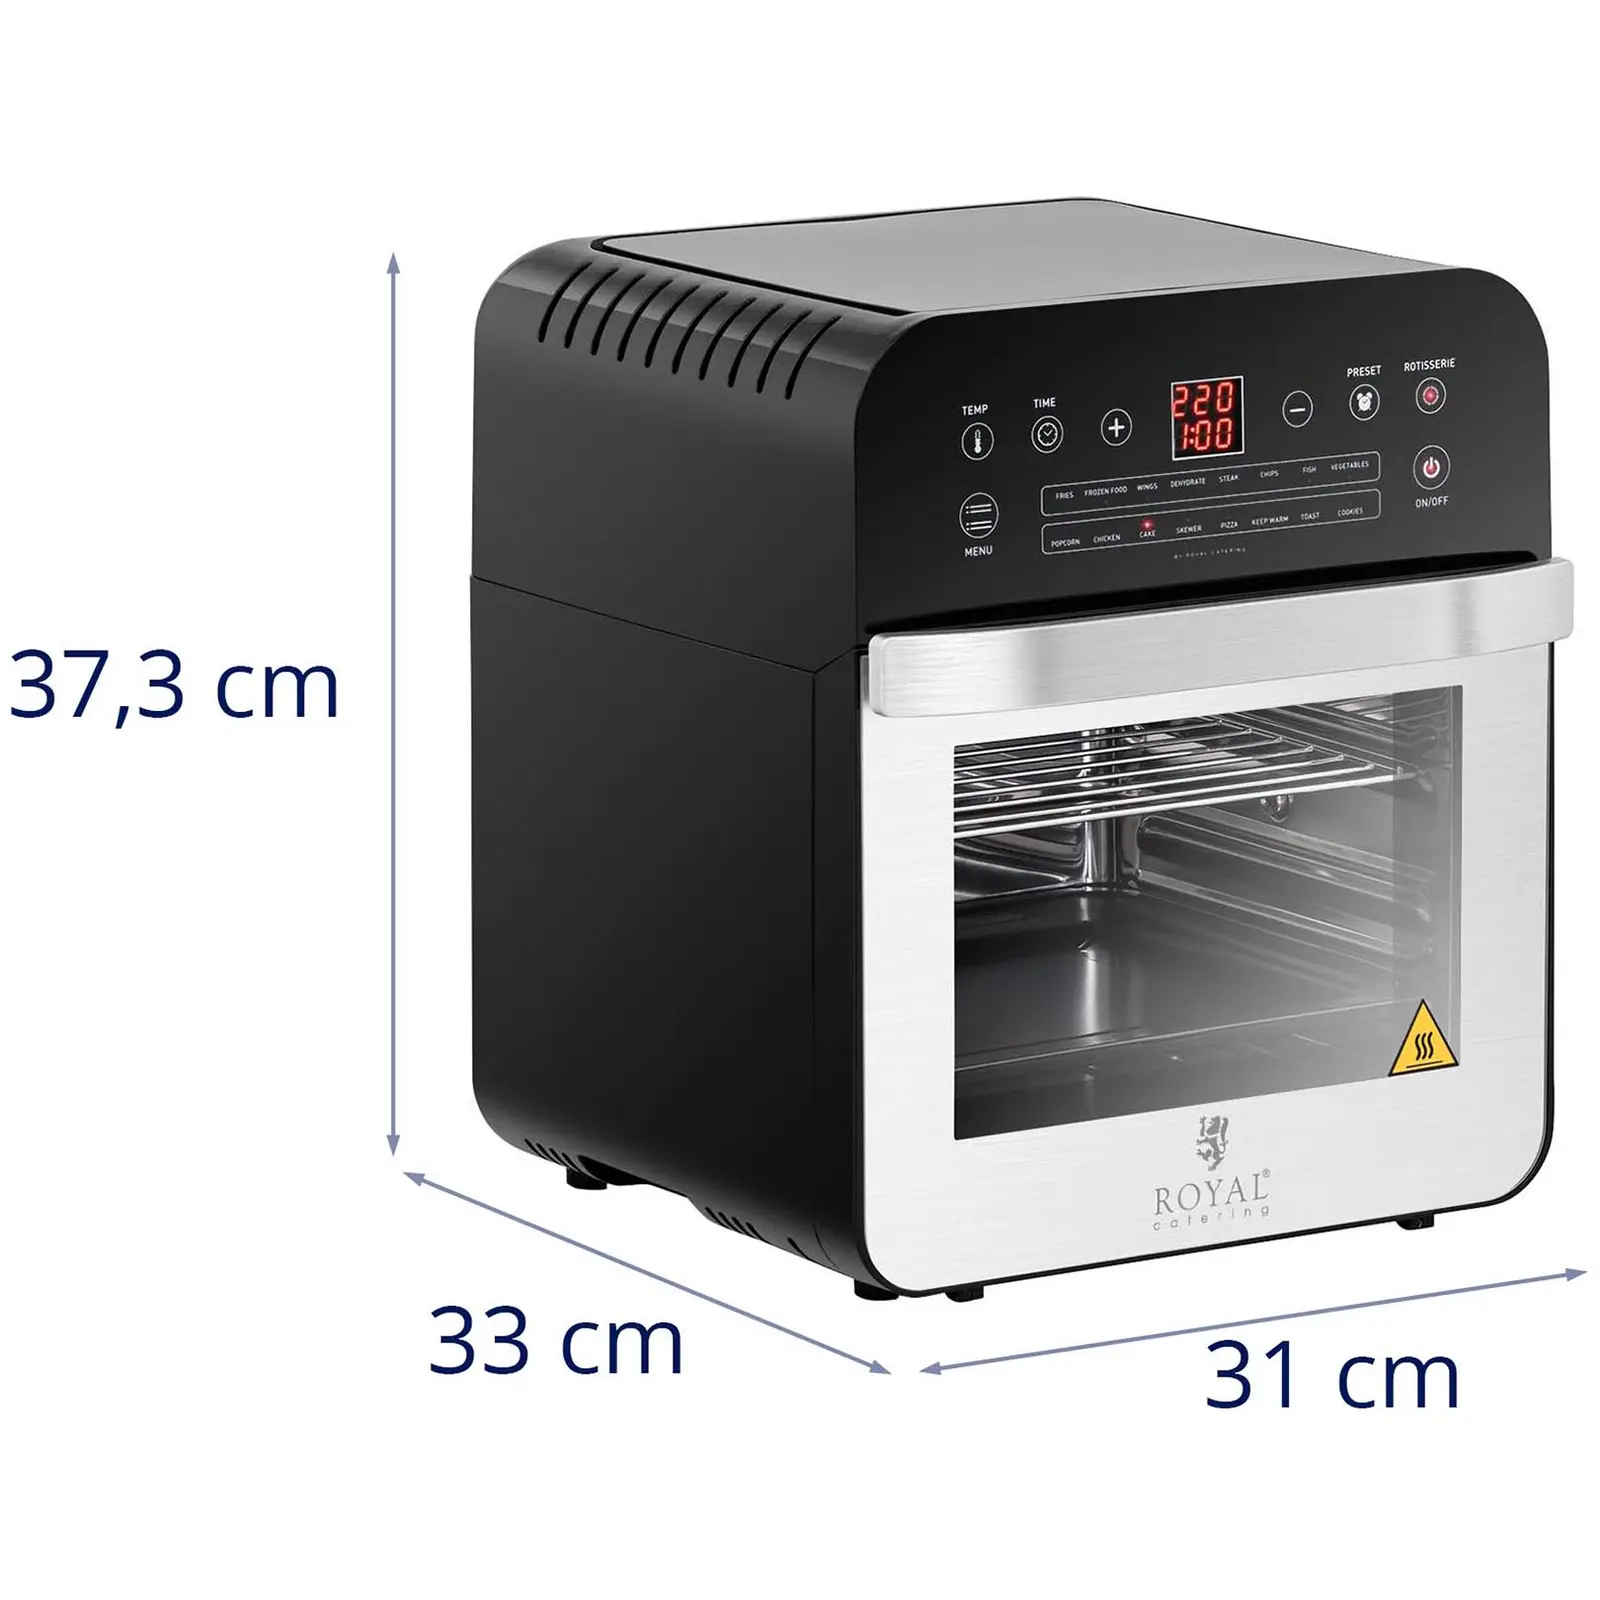 Factory second Countertop Convection Oven - 1,600 W - 13 programmes - incl. oven rack, baking sheet, rotisserie and drip tray